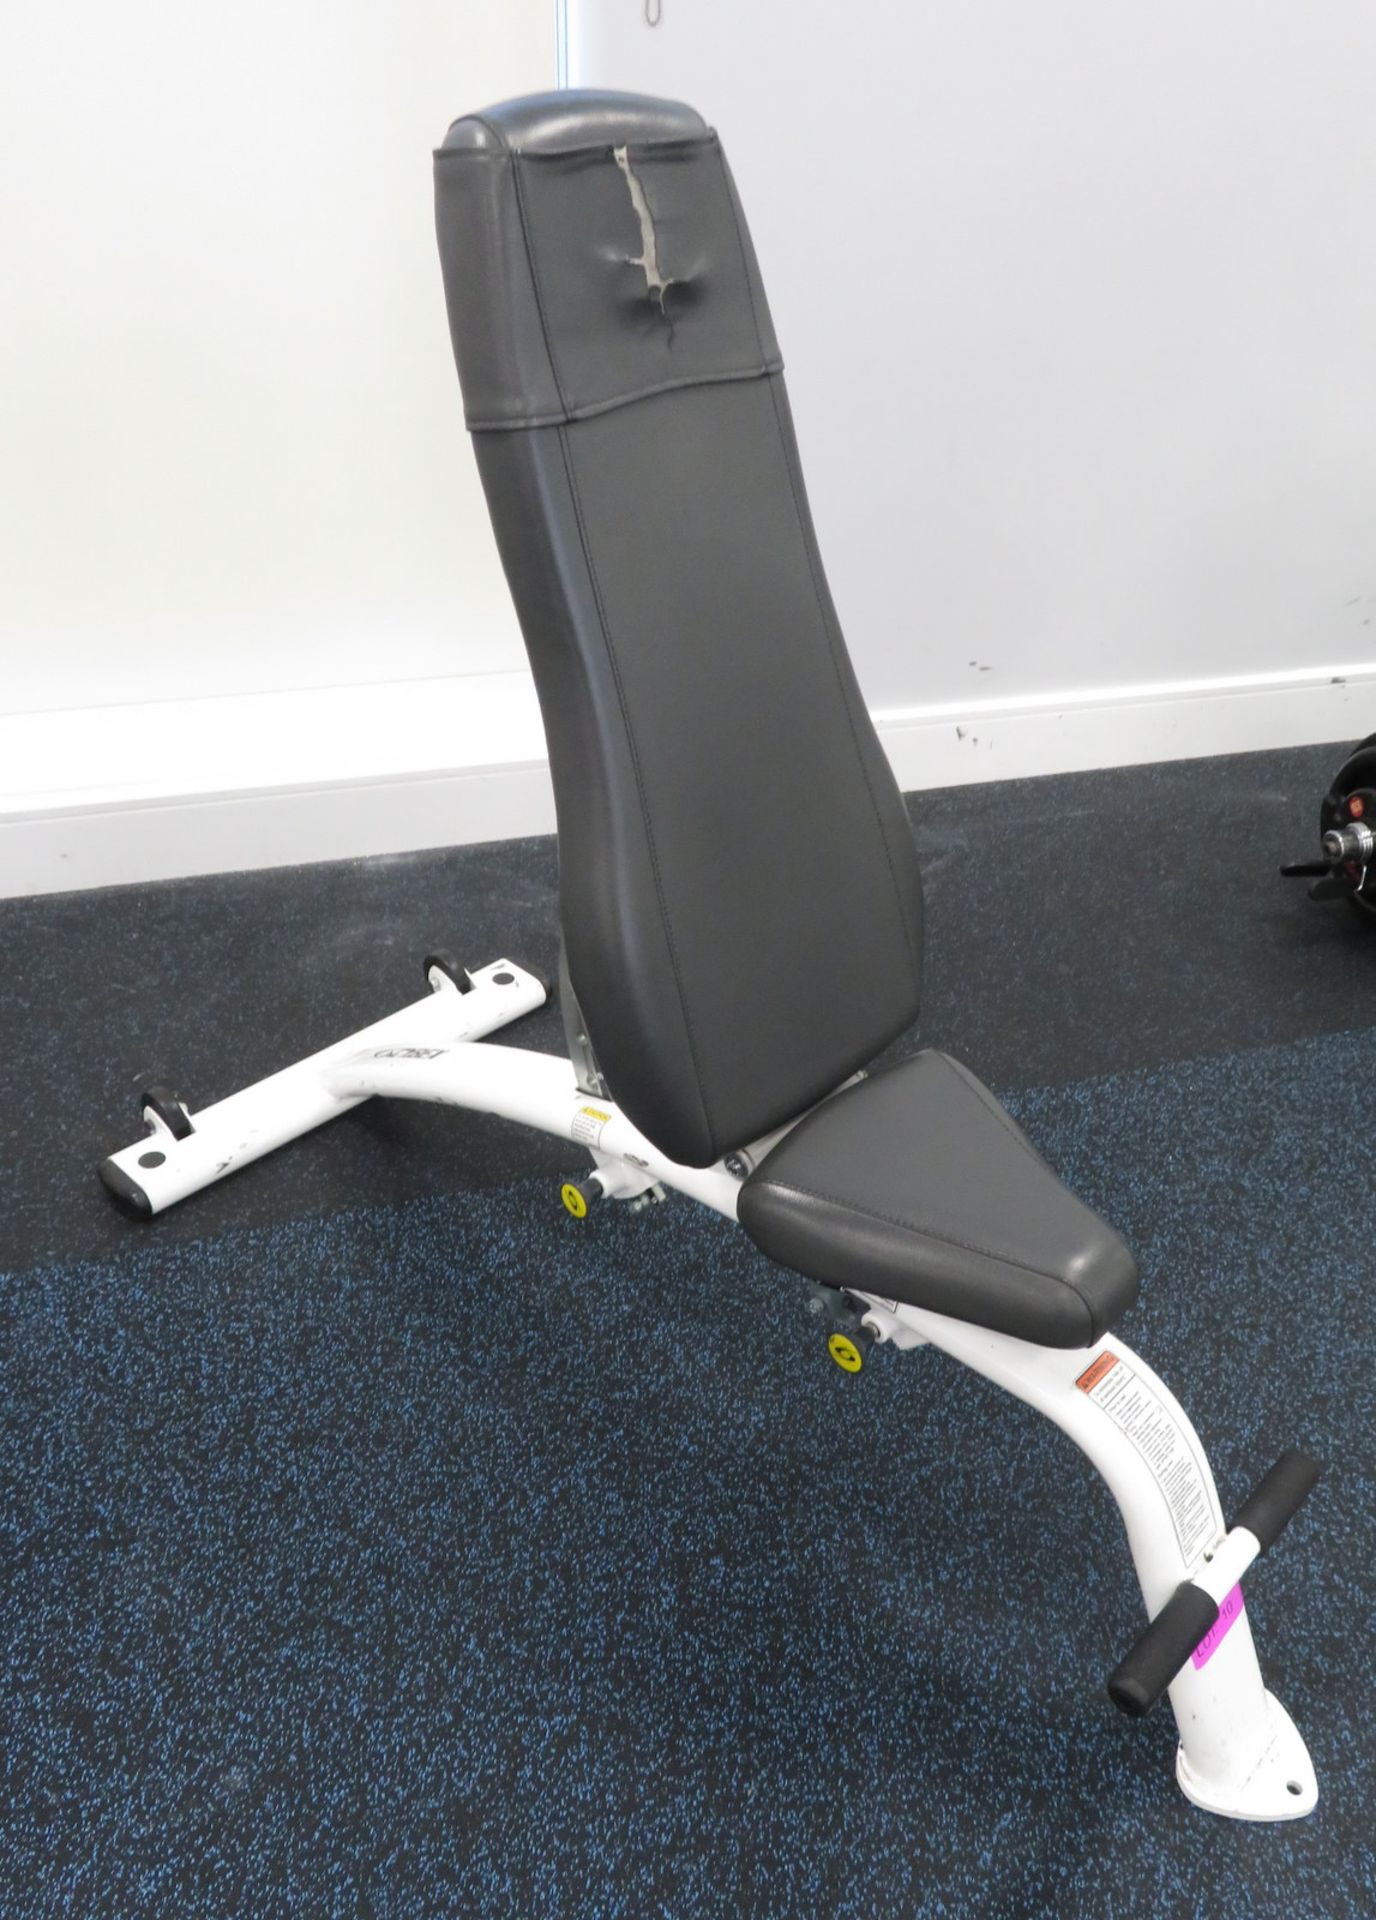 Cybex Adjustable Bench (Free-standing)1600 Dimensions: 63x140x45cm (LxDxH) - Image 2 of 7